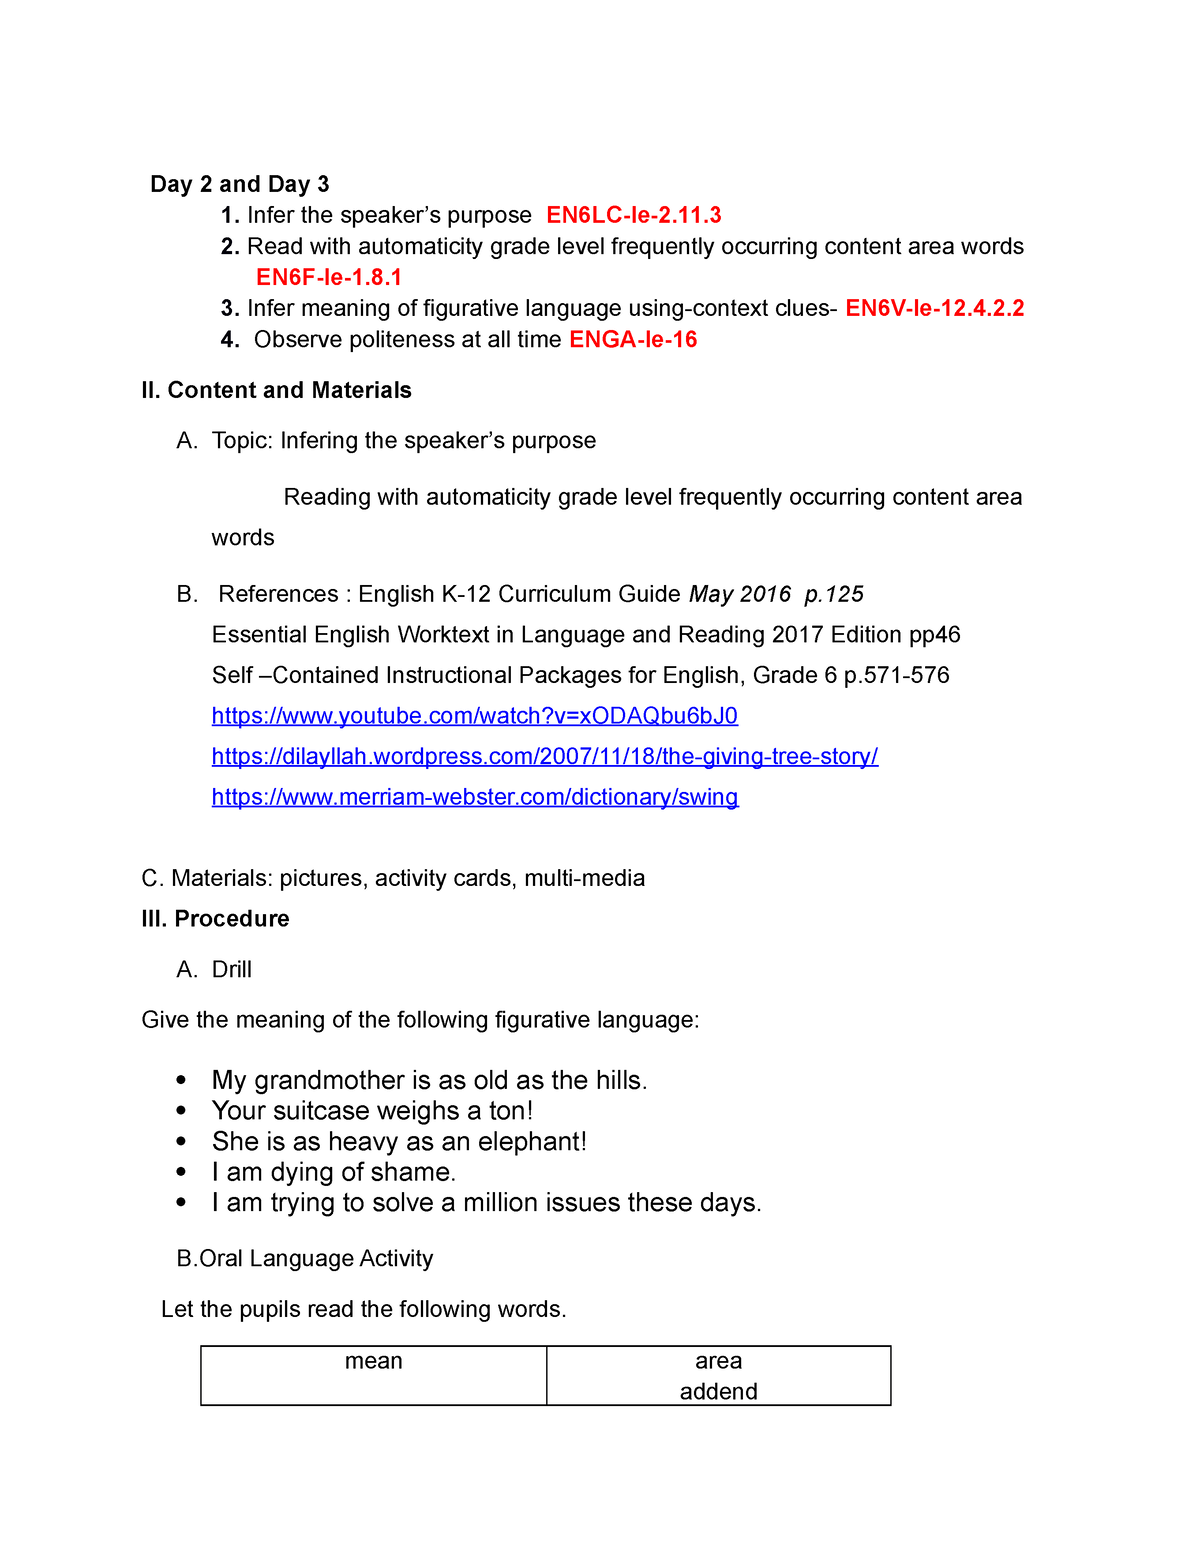 Tg Q1 Week5 D2d3 Teacher Guide For English 1 Quarter 1 Week 5 Day 2 3 Day 2 And Day 3 1 3085